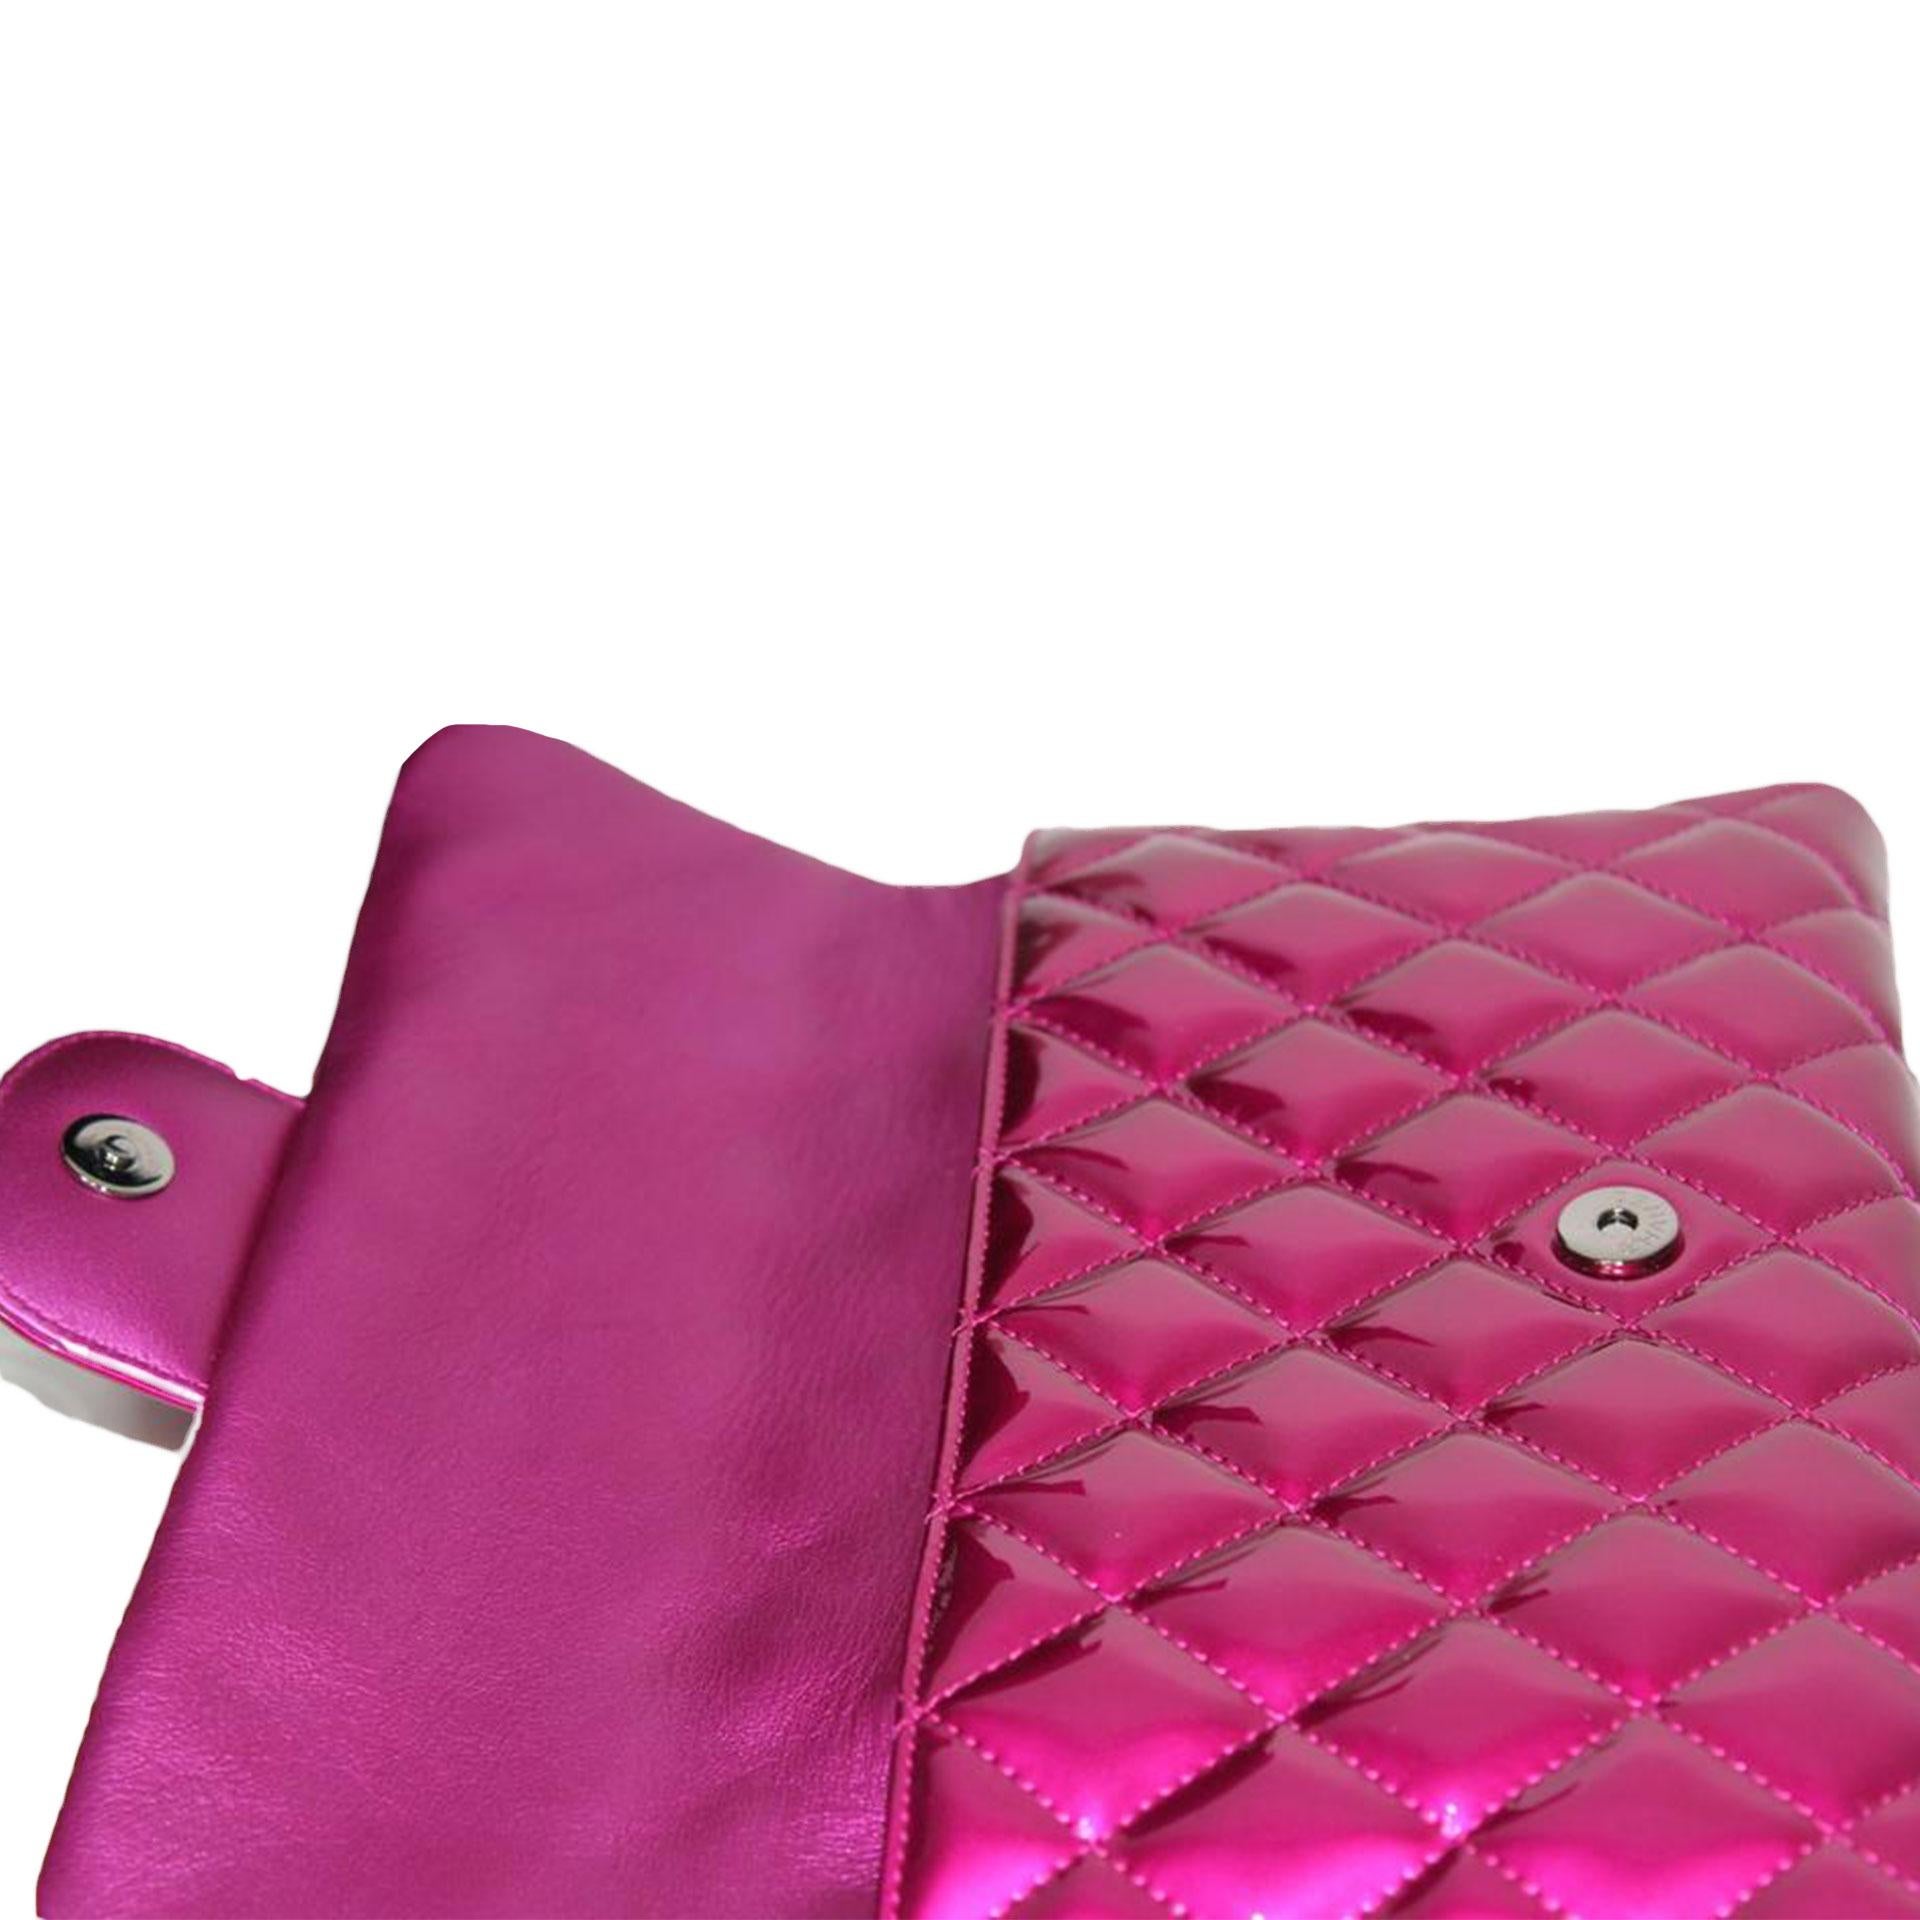 Chanel Rare Runway Quilted Classic Flap Bag Patent Hot Pink Fuschia Clutch  1